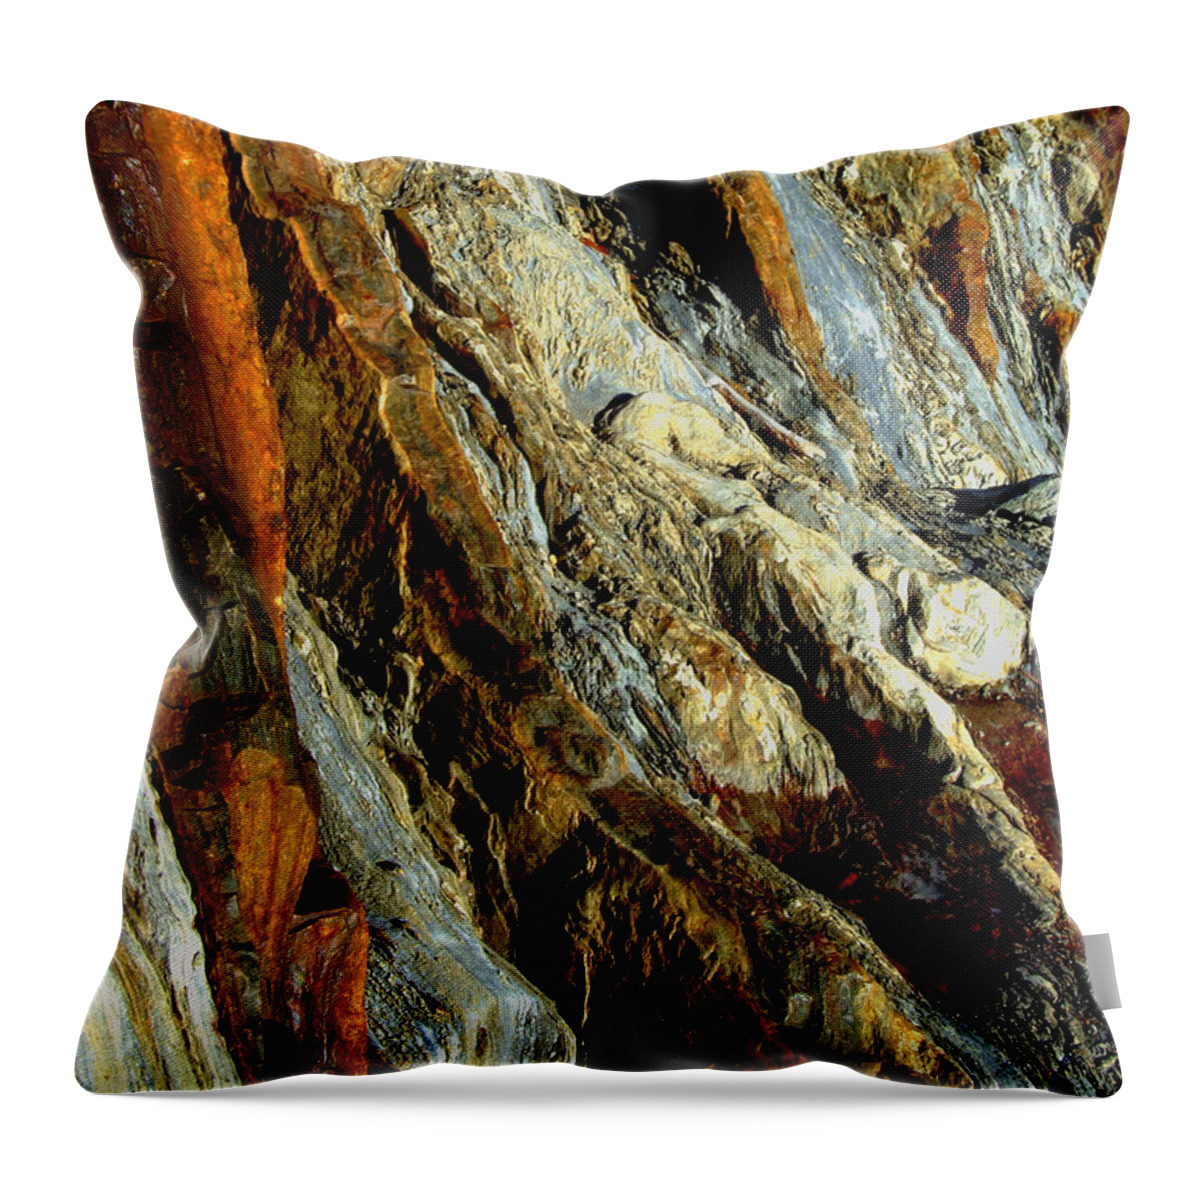 Rock Throw Pillow featuring the photograph Stone History by Donna Blackhall